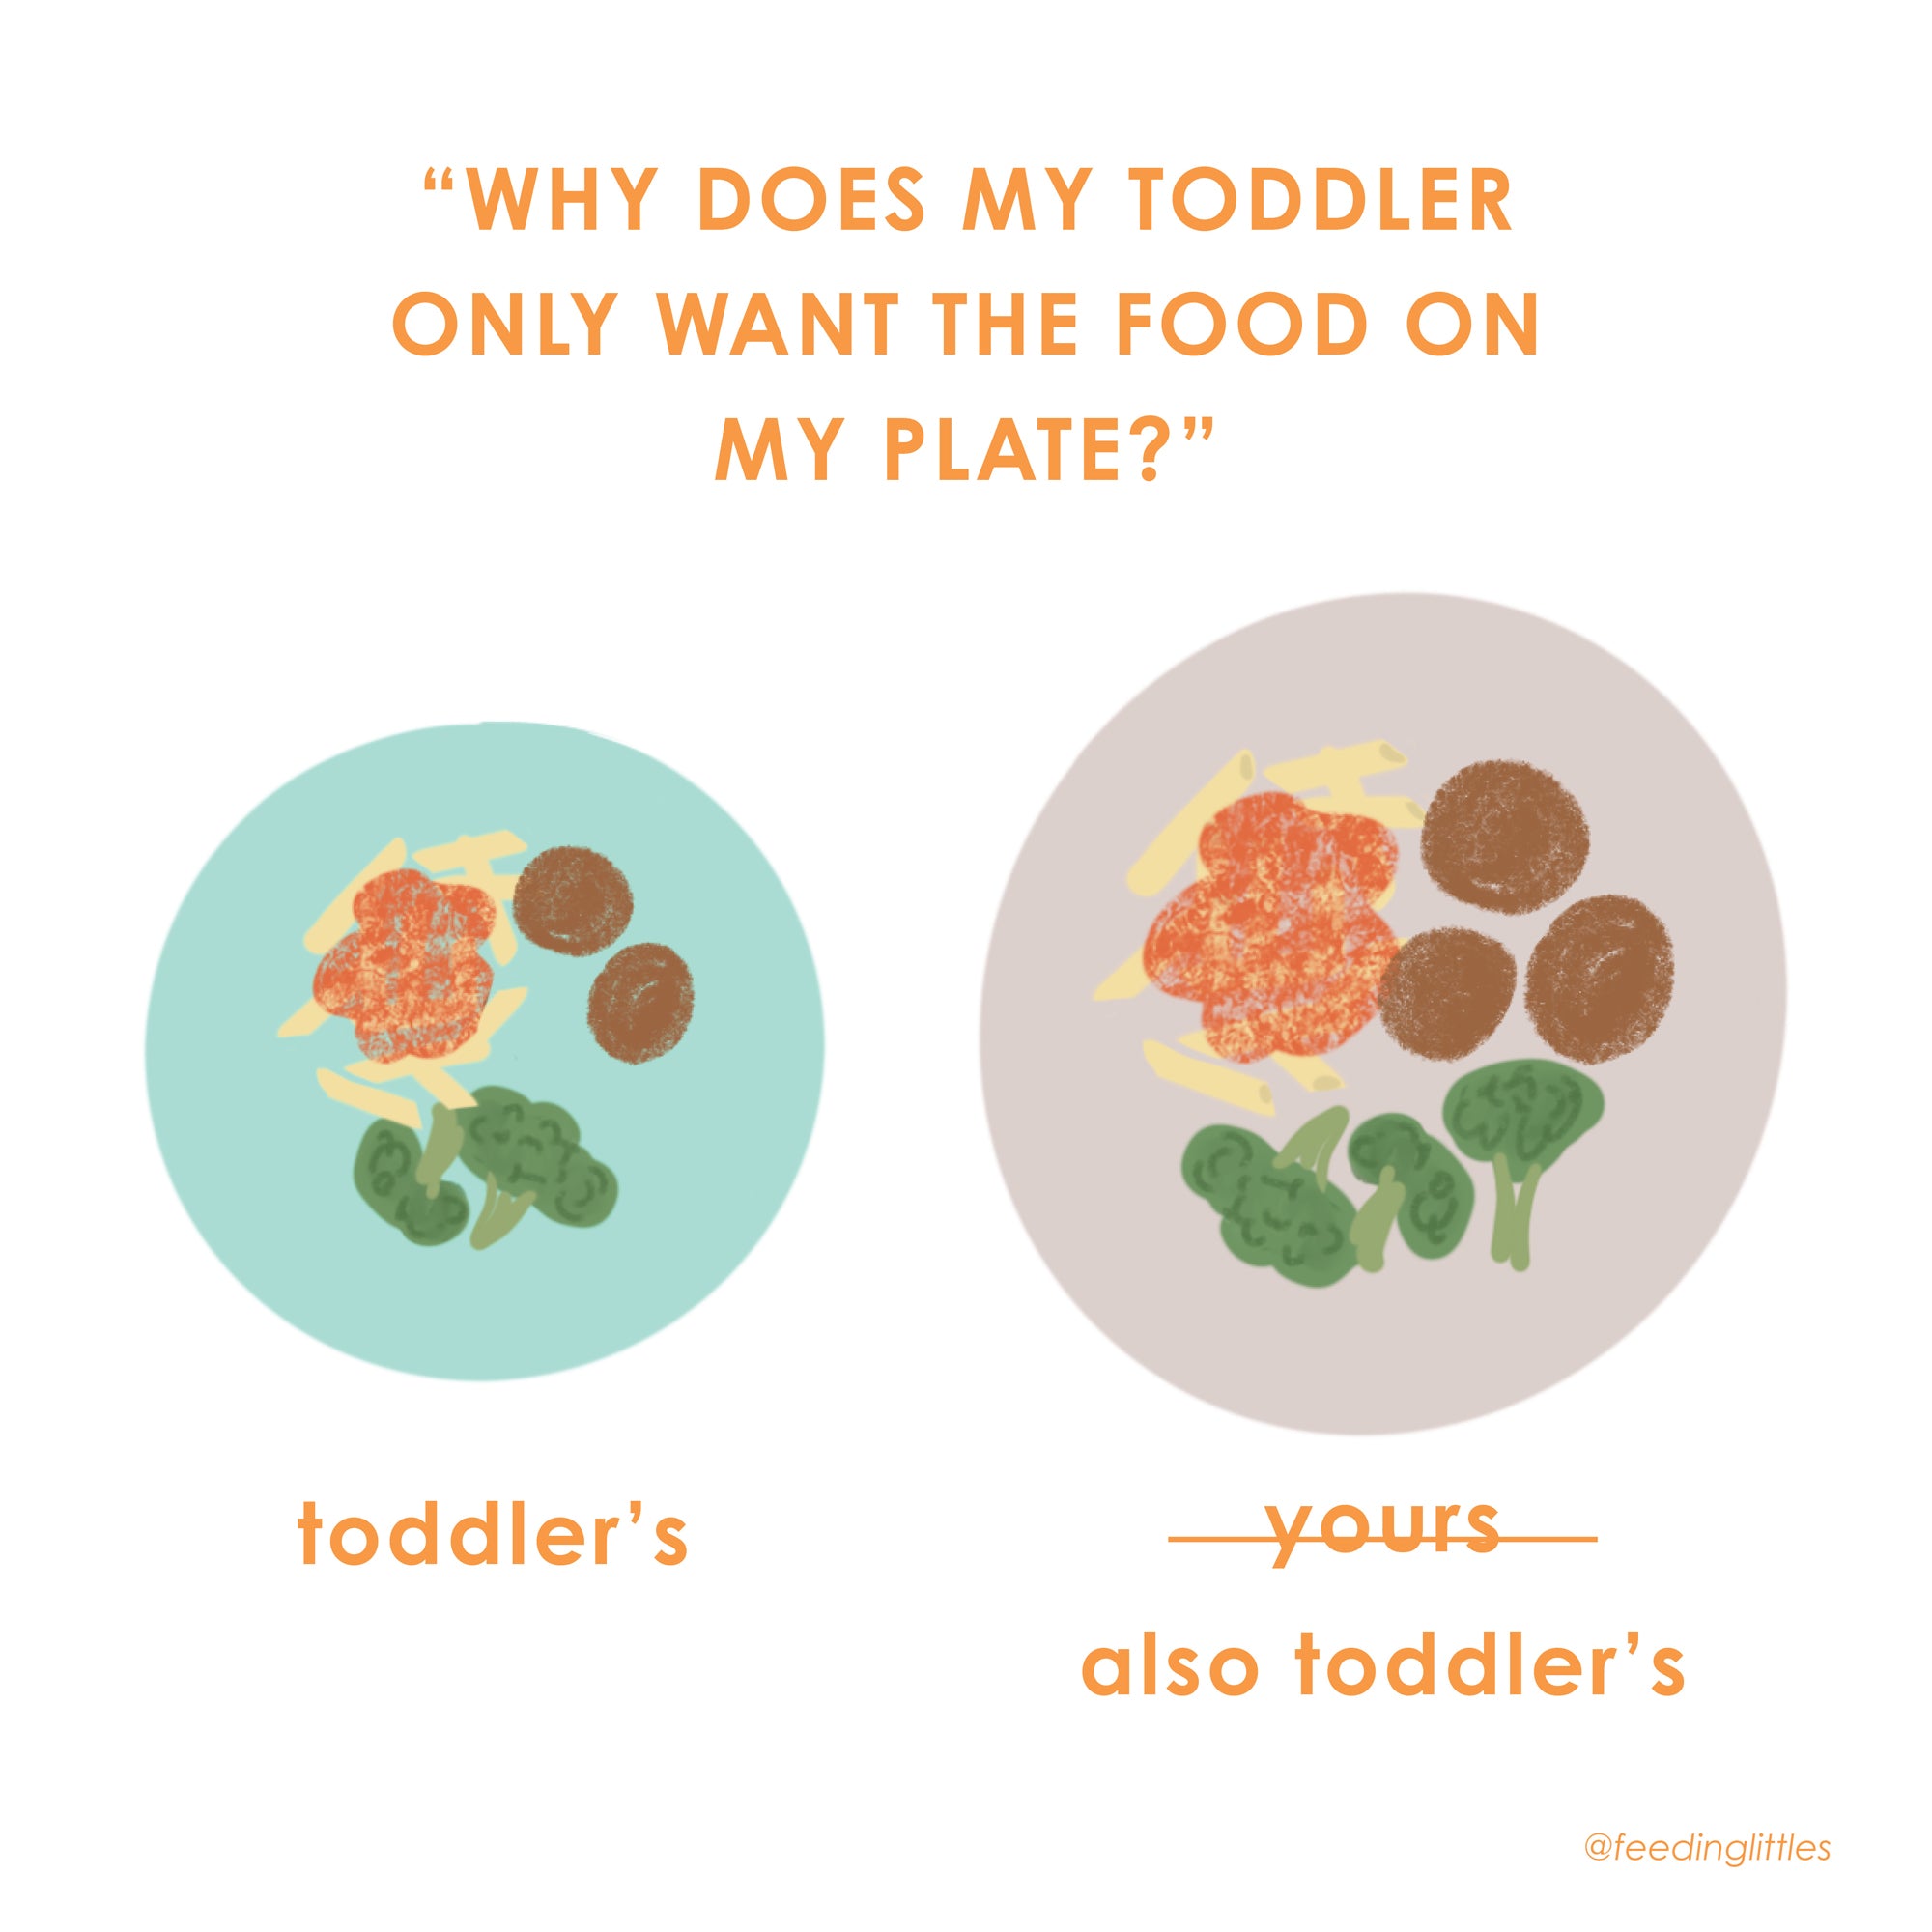 Why does my toddler only want the food on my plate?